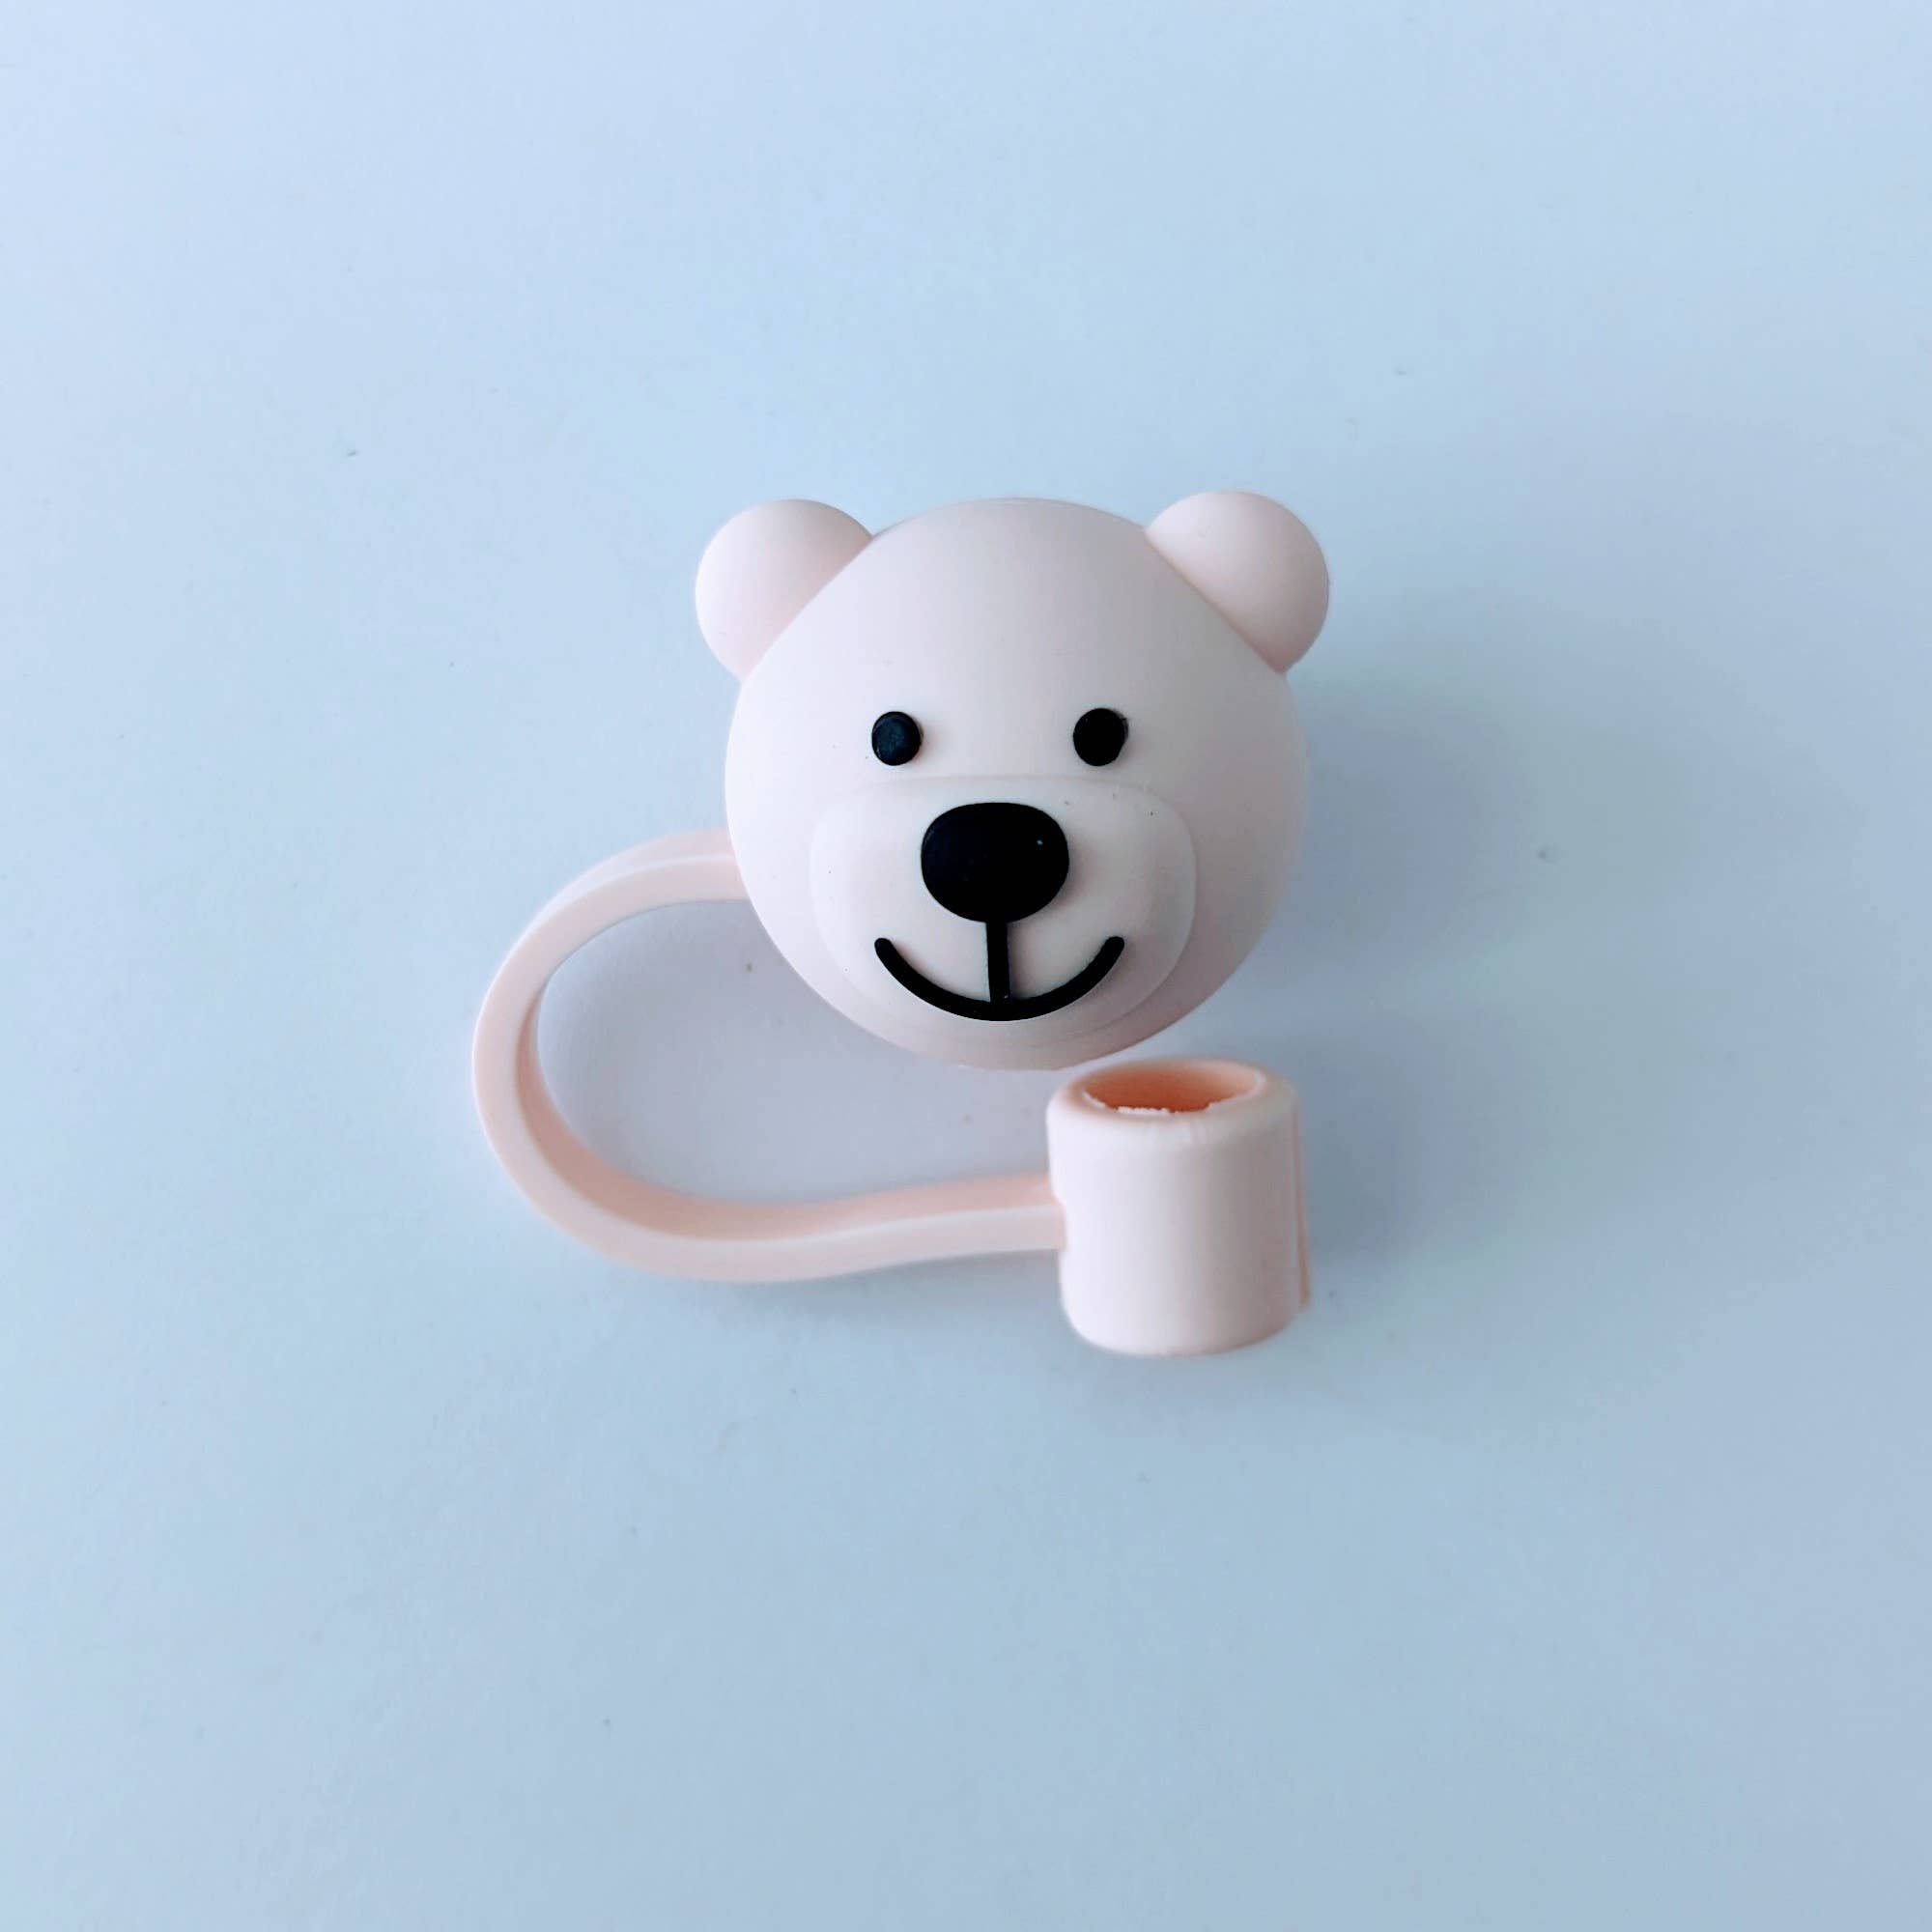 iconic mi Silicone Straw Covers - Cute Animals | Bear